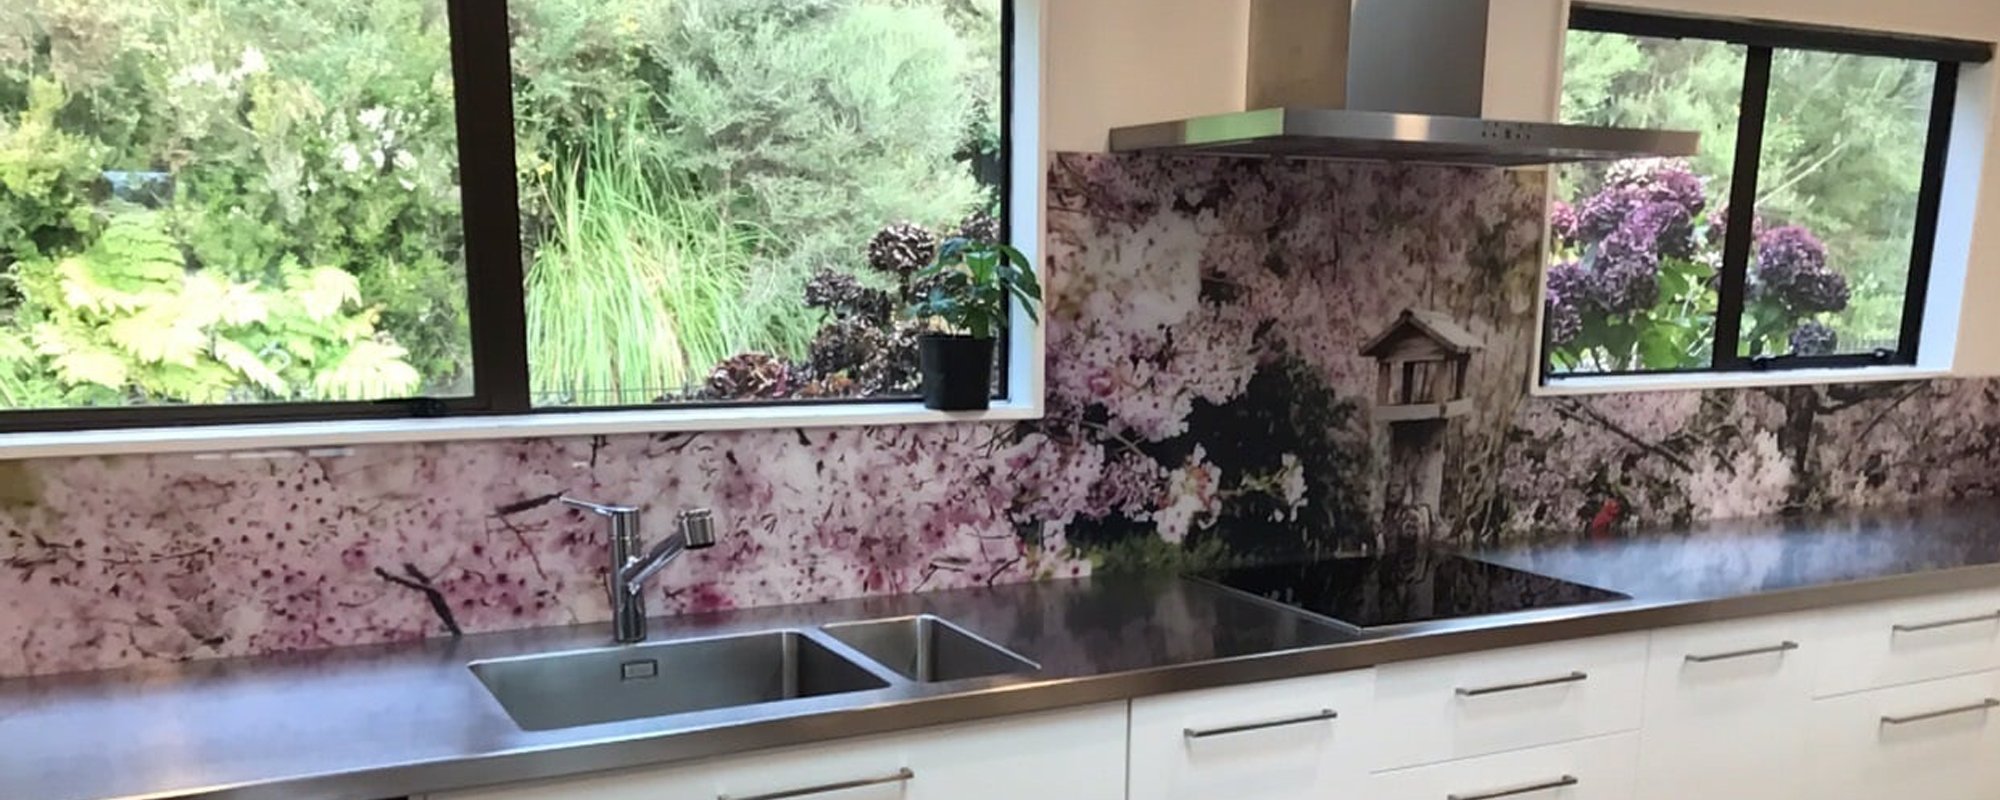 Modern white kitchen with a silver benchtop and a purple and white flowery image on the splashback